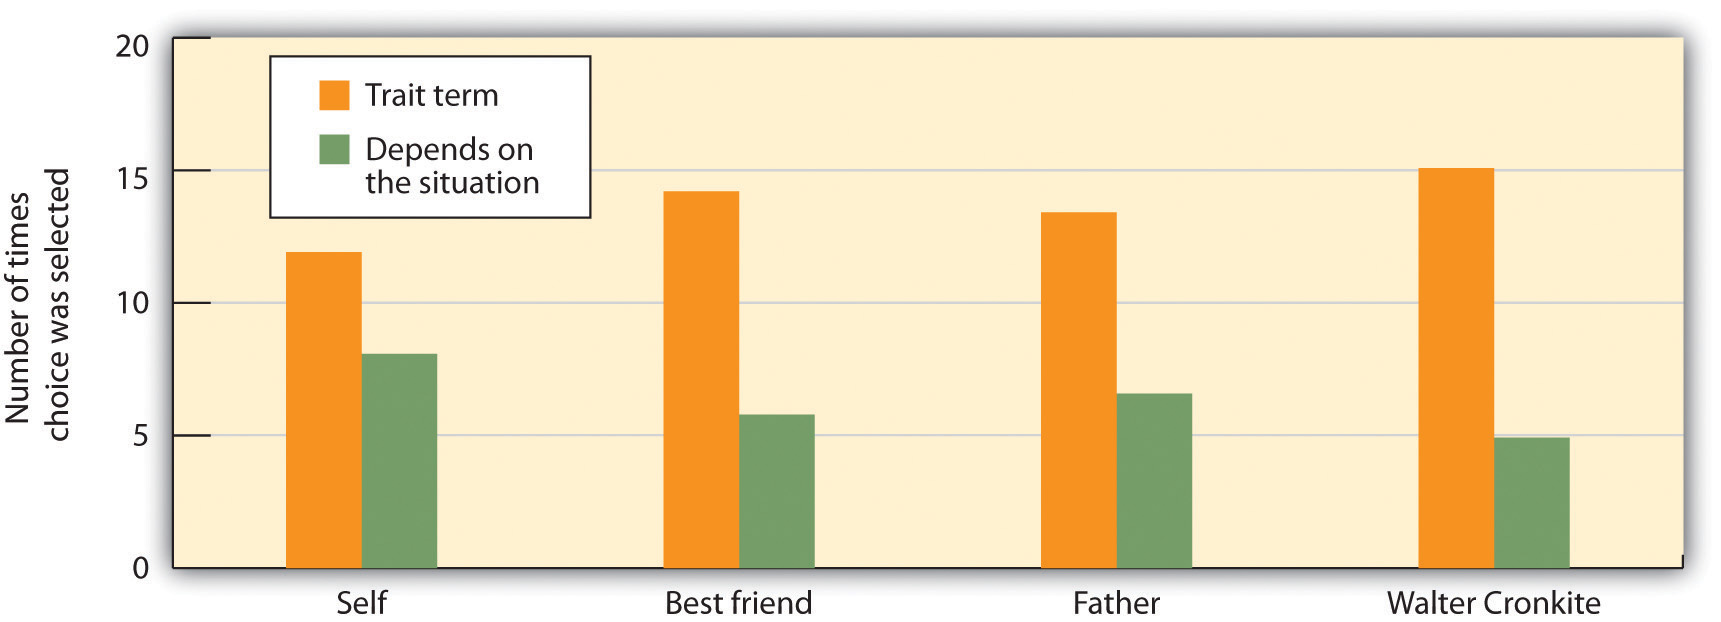 A chart of the number of times choice was selected. The choice was either trait term or depends on the situation. The score for each are as follows: for self the trait term is about 12 and the depends of the situation is about 8, for best friend the trait term is about 14 and the depends of the situation is about 6, for father the trait term is about 13 and the depends of the situation is about 7, and for Walter Cronkite the trait term is about 15 and the depends of the situation is about 5.